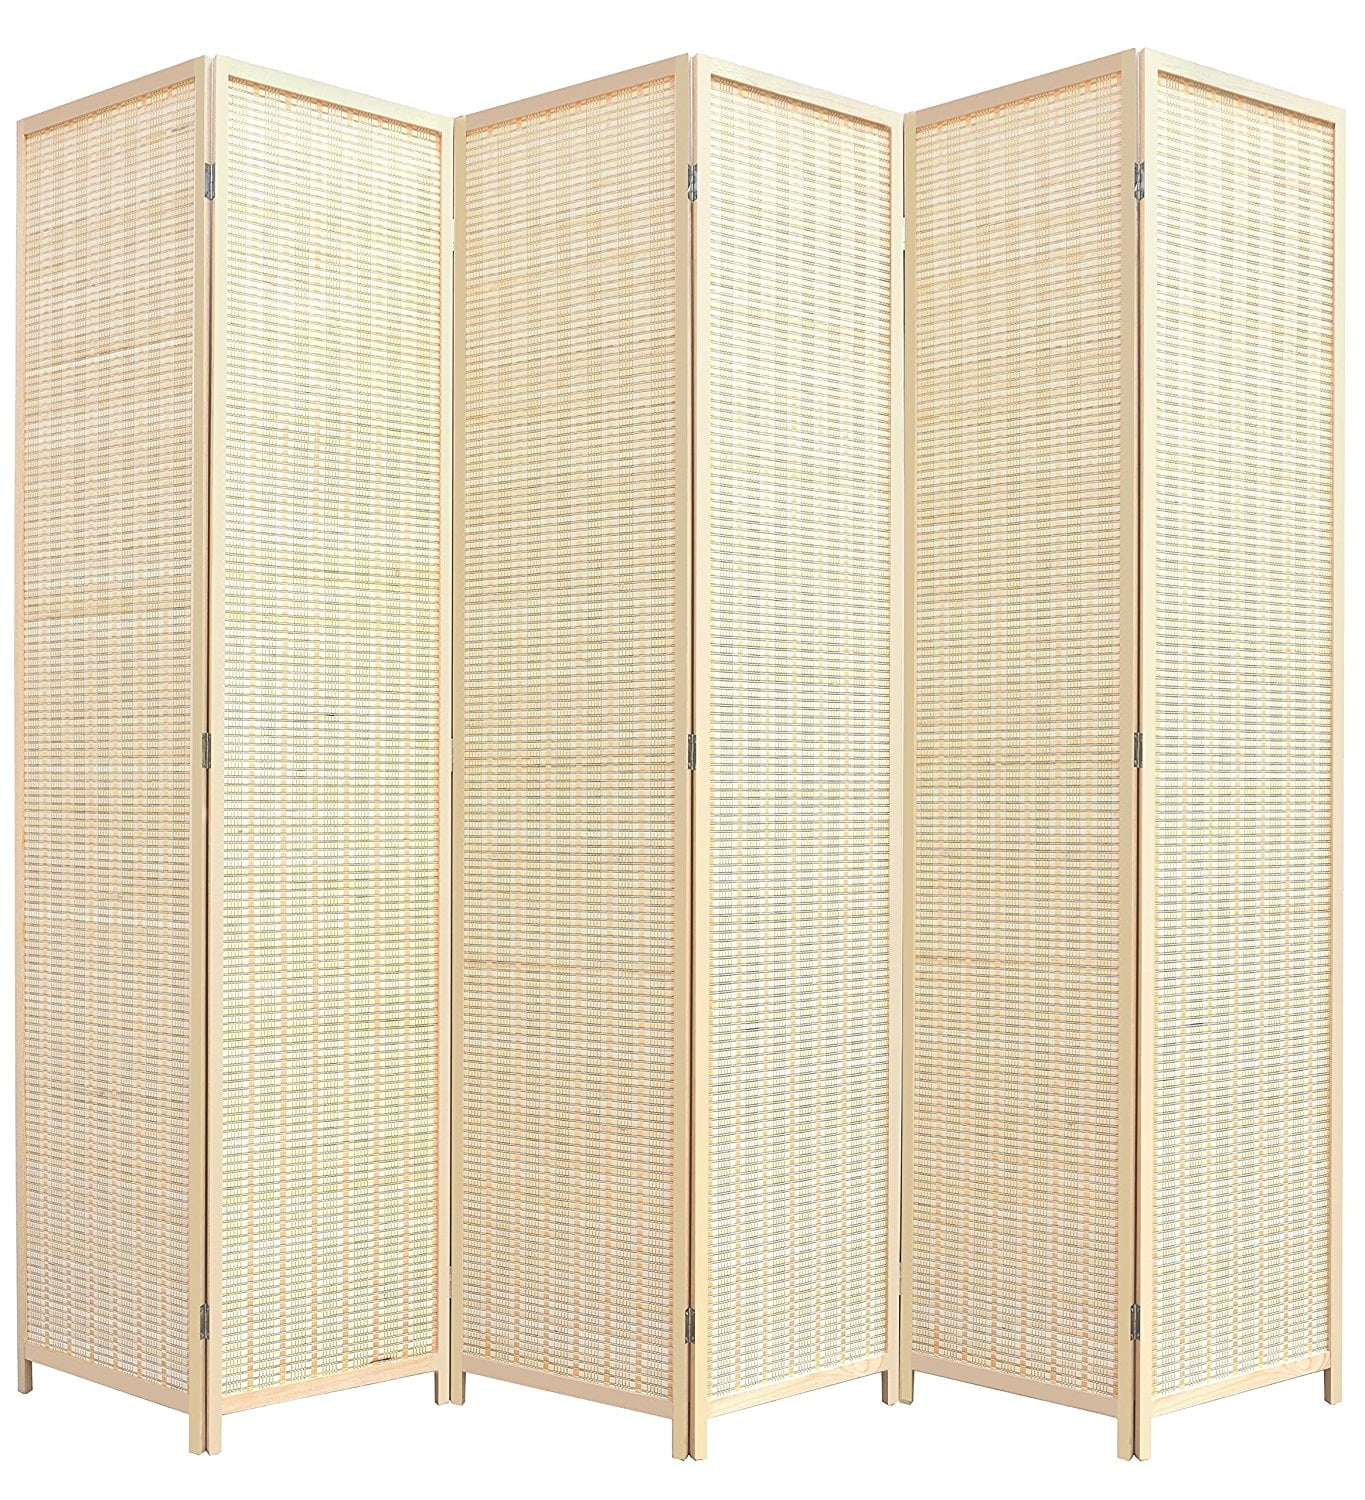 rhf-6-ft-tall-extra-wide-double-hinged-bamboo-room-divider-6-panel